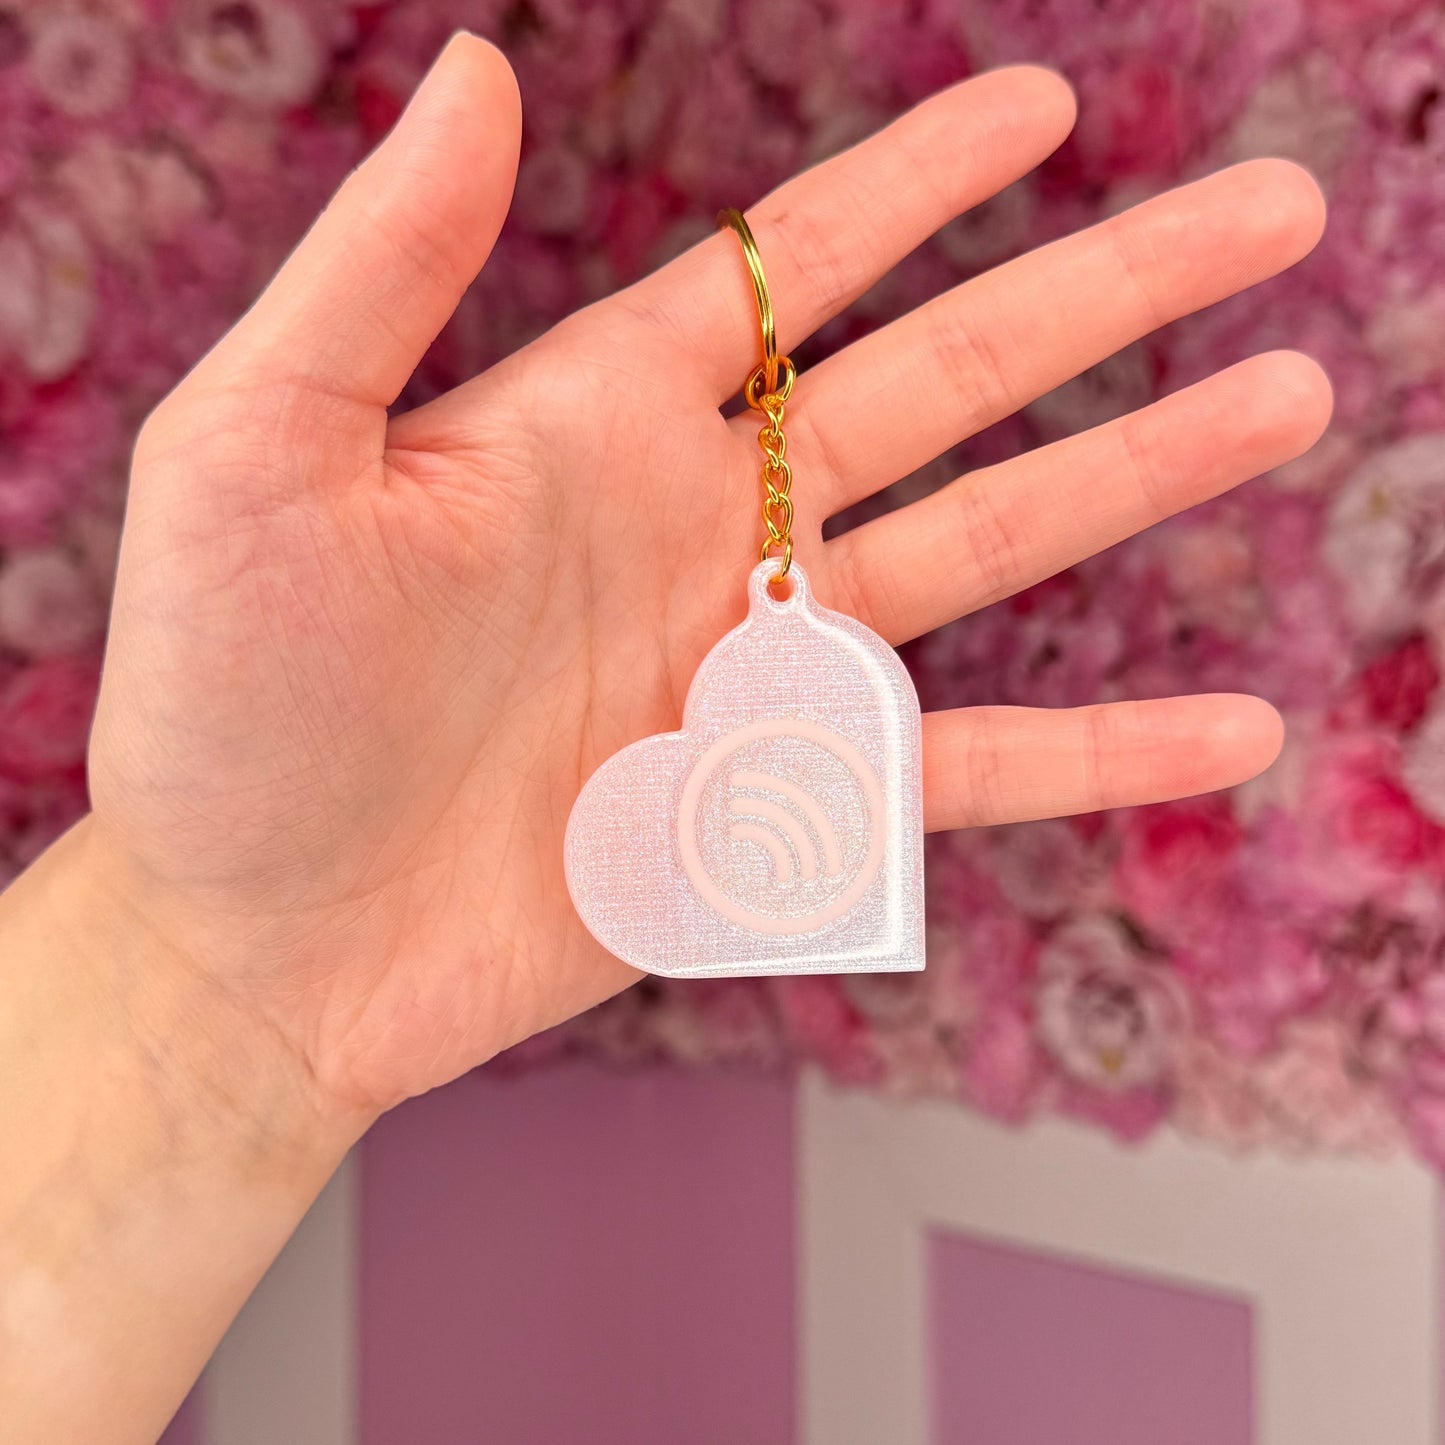 NFC Heart KeyChain Free Delivery